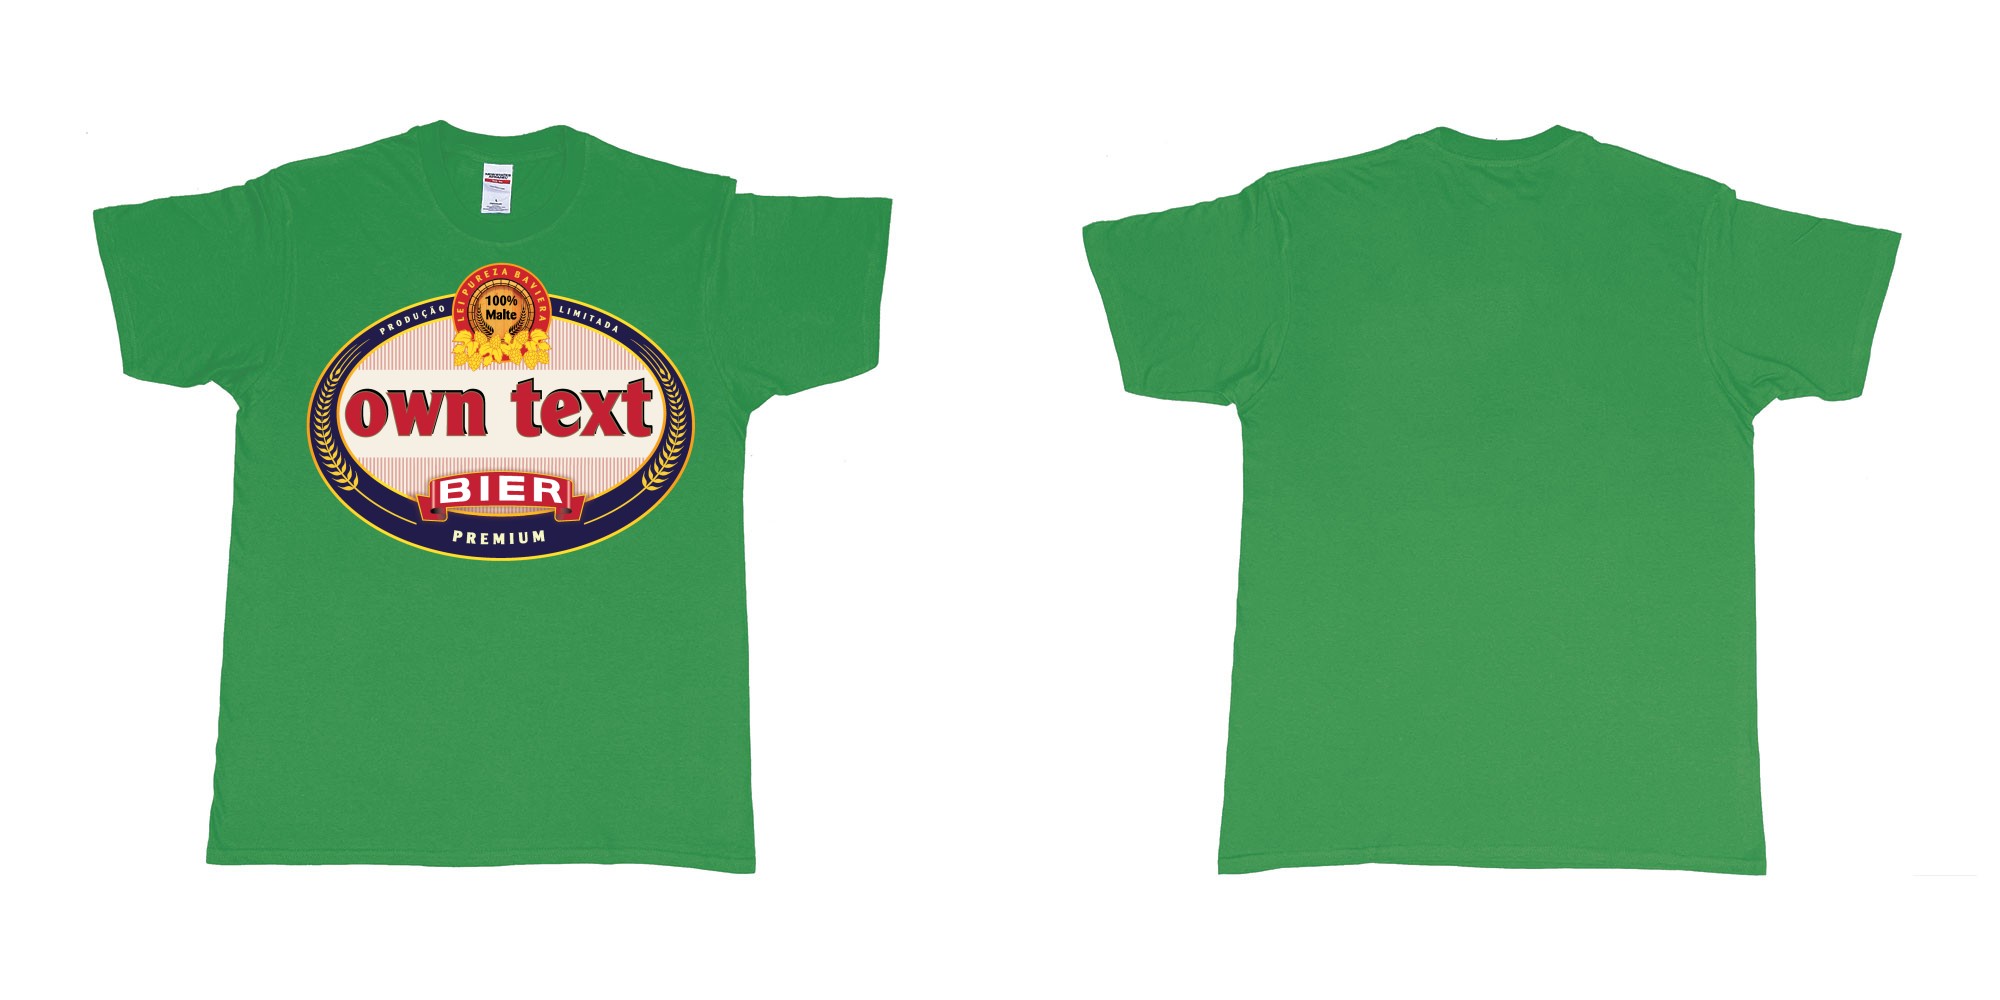 Custom tshirt design austria premium krug bier 100 malte beer label own text print in fabric color irish-green choice your own text made in Bali by The Pirate Way